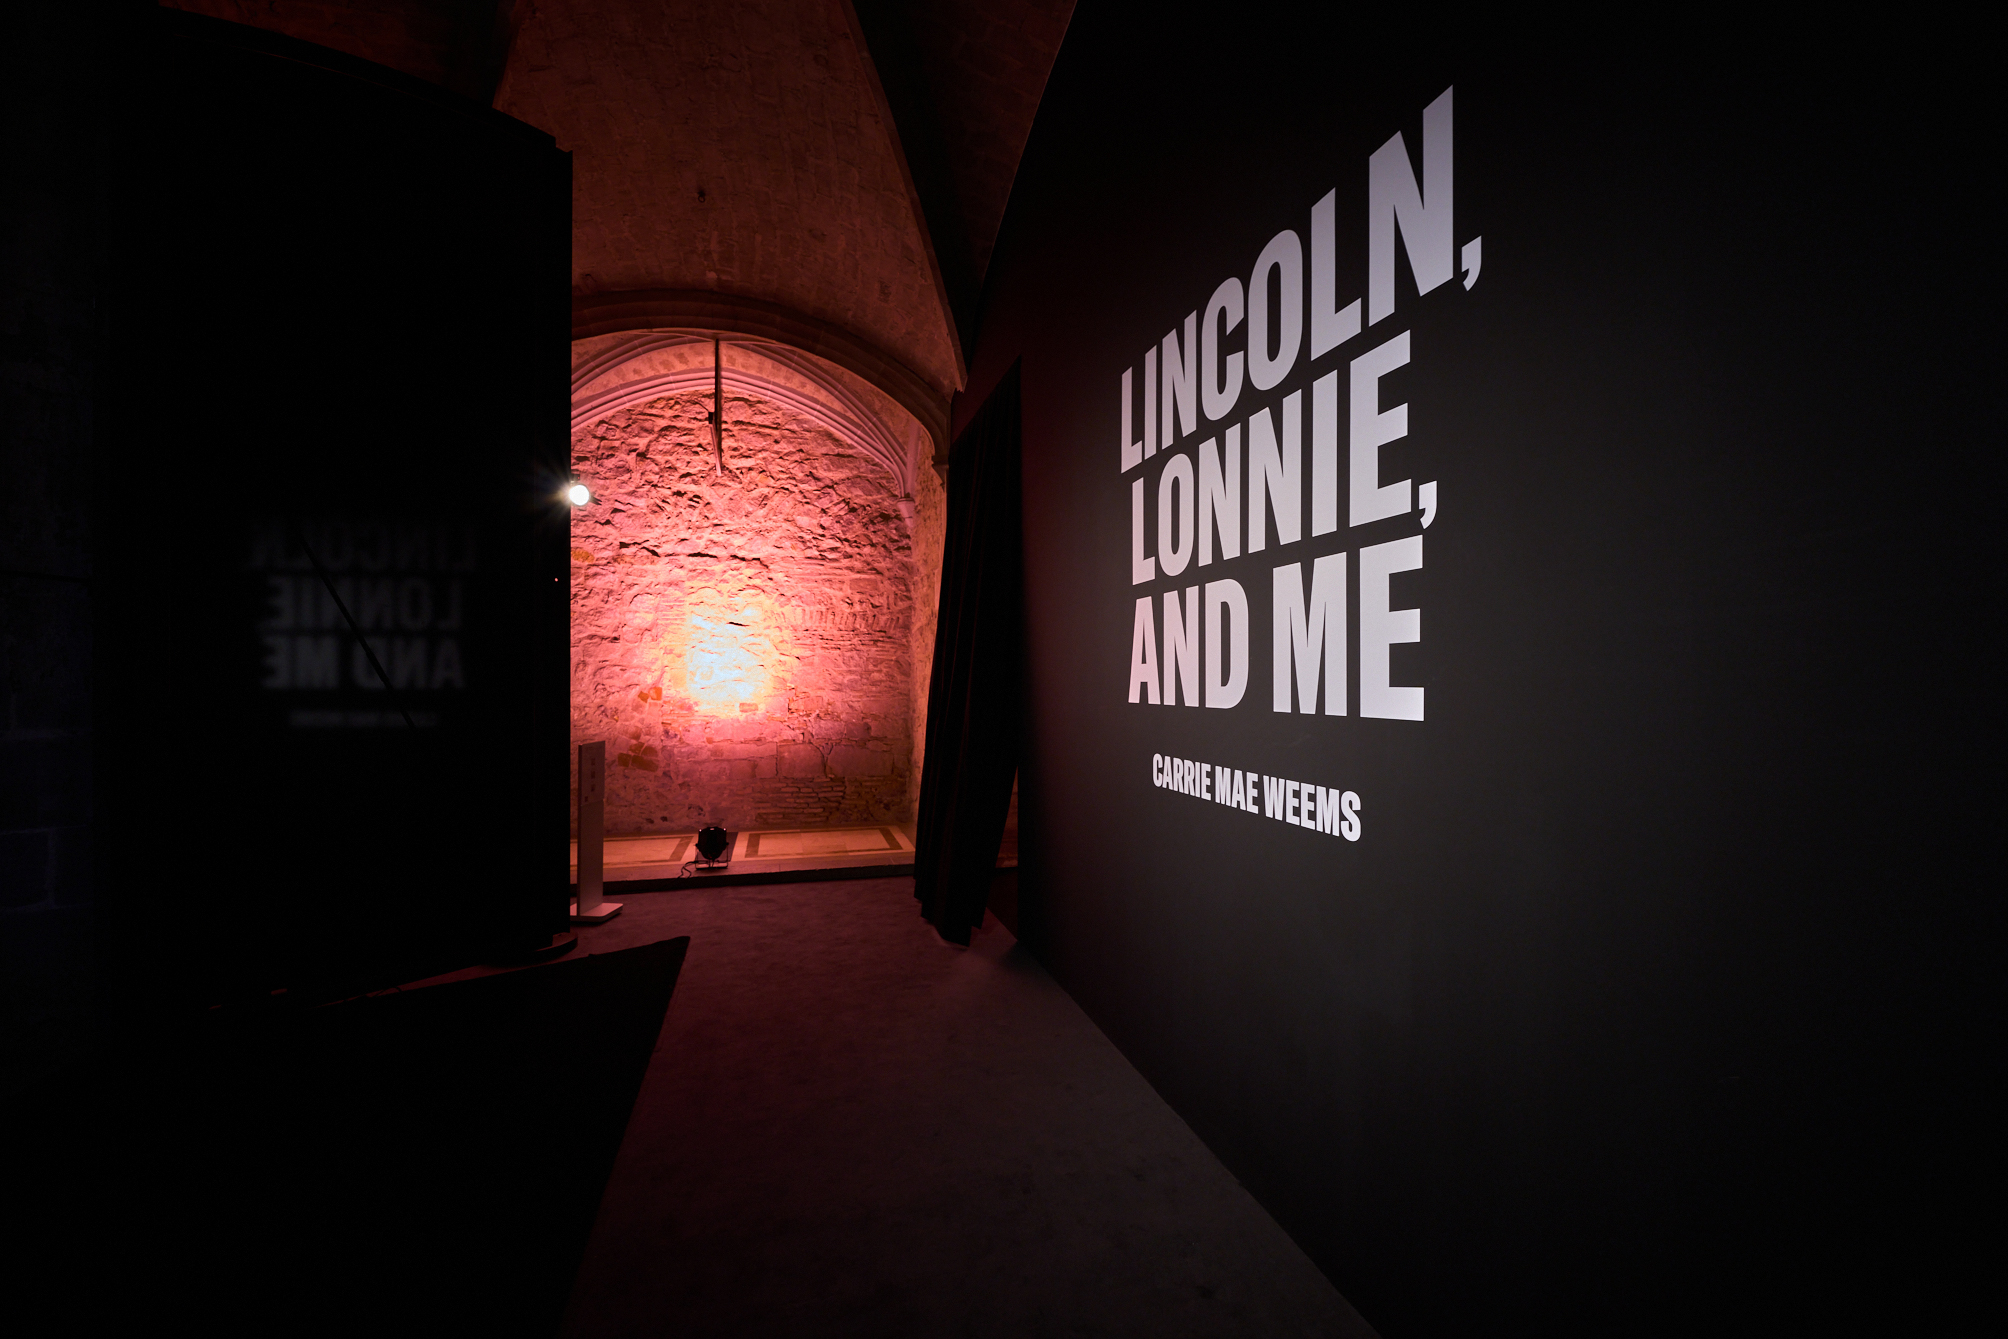 Galerie Barbara Thumm \ Carrie Mae Weems – Lincoln, Lonnie and Me – Museum of Contemporary Art, Barcelona 2022